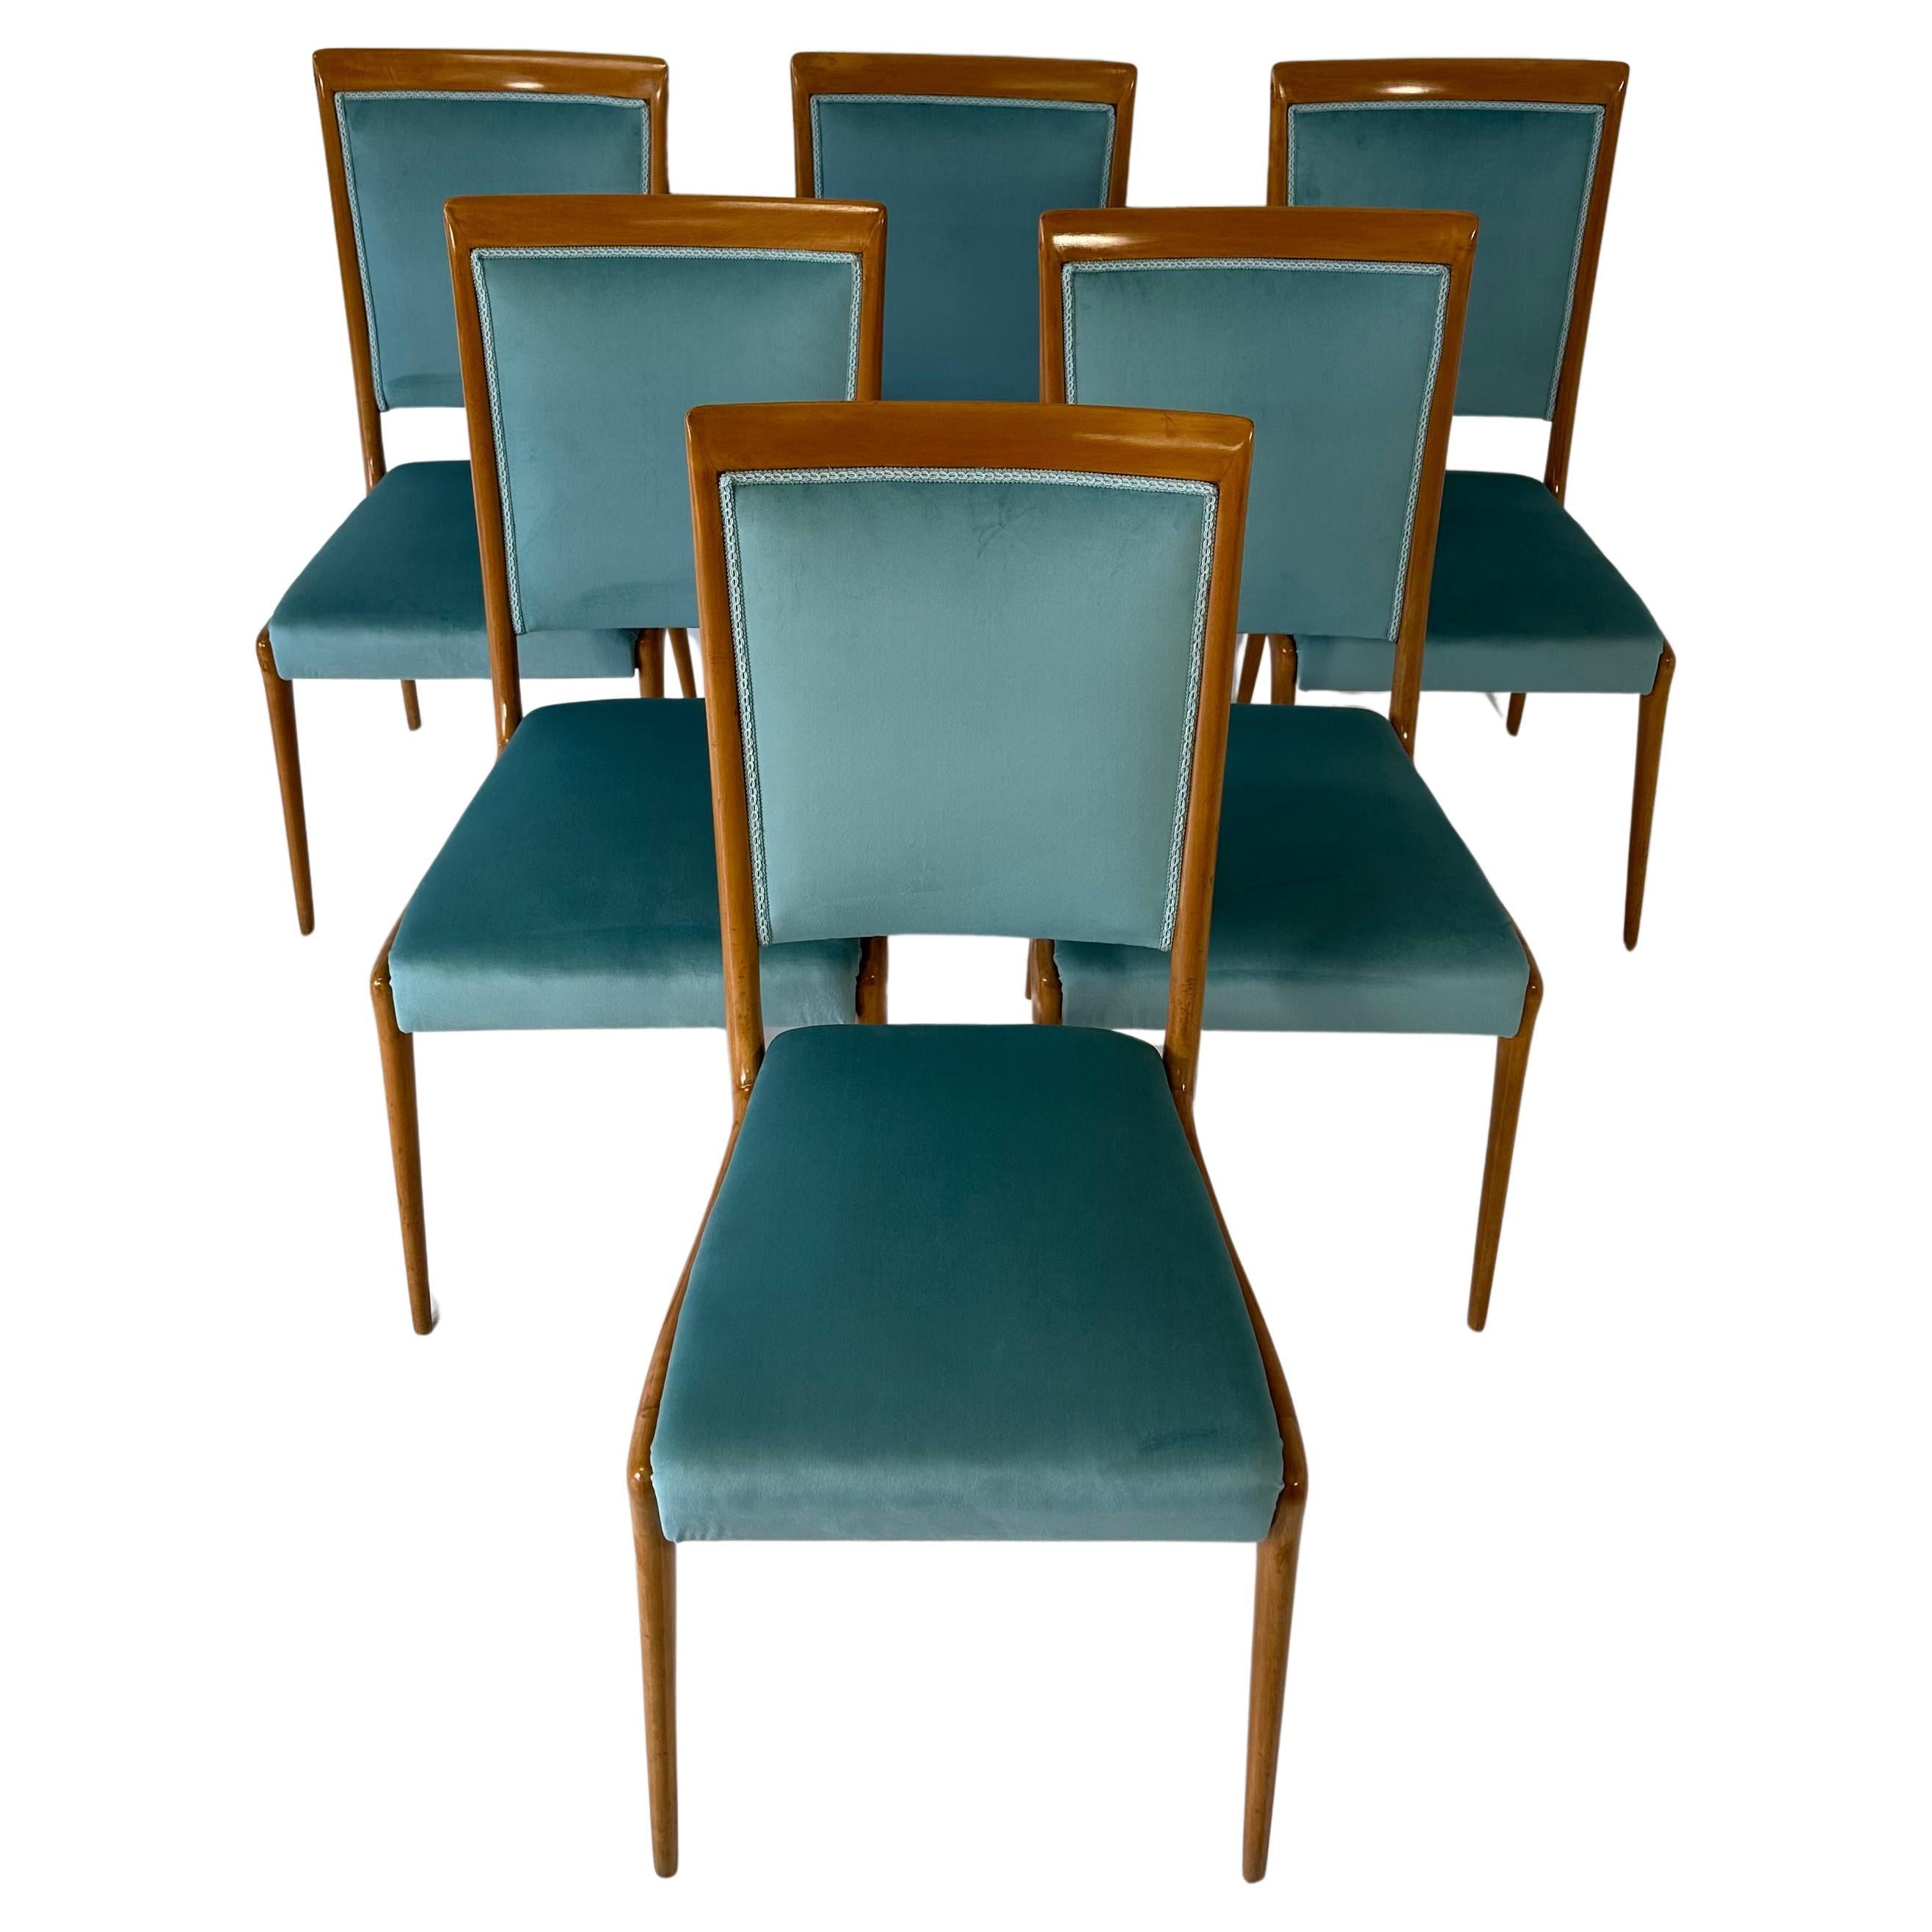 Italian Art Deco Set of Six Maple and Tiffany Velvet Chairs by V. Dassi, 1940s